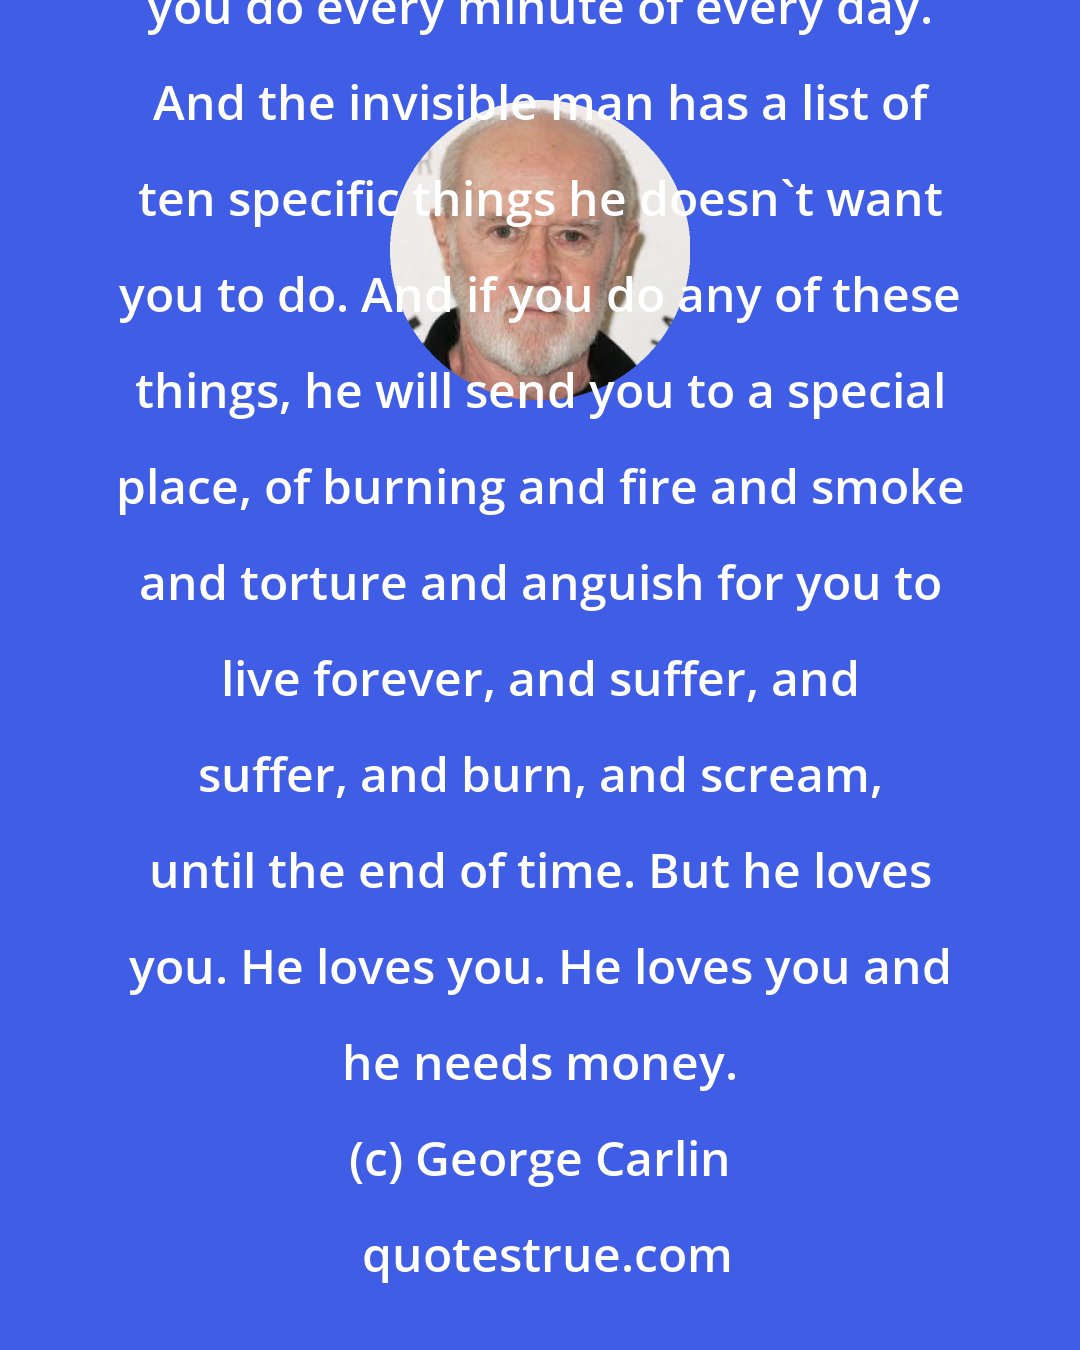 George Carlin: Religion has convinced people that there's an invisible man ... living in the sky. Who watches everything you do every minute of every day. And the invisible man has a list of ten specific things he doesn't want you to do. And if you do any of these things, he will send you to a special place, of burning and fire and smoke and torture and anguish for you to live forever, and suffer, and suffer, and burn, and scream, until the end of time. But he loves you. He loves you. He loves you and he needs money.